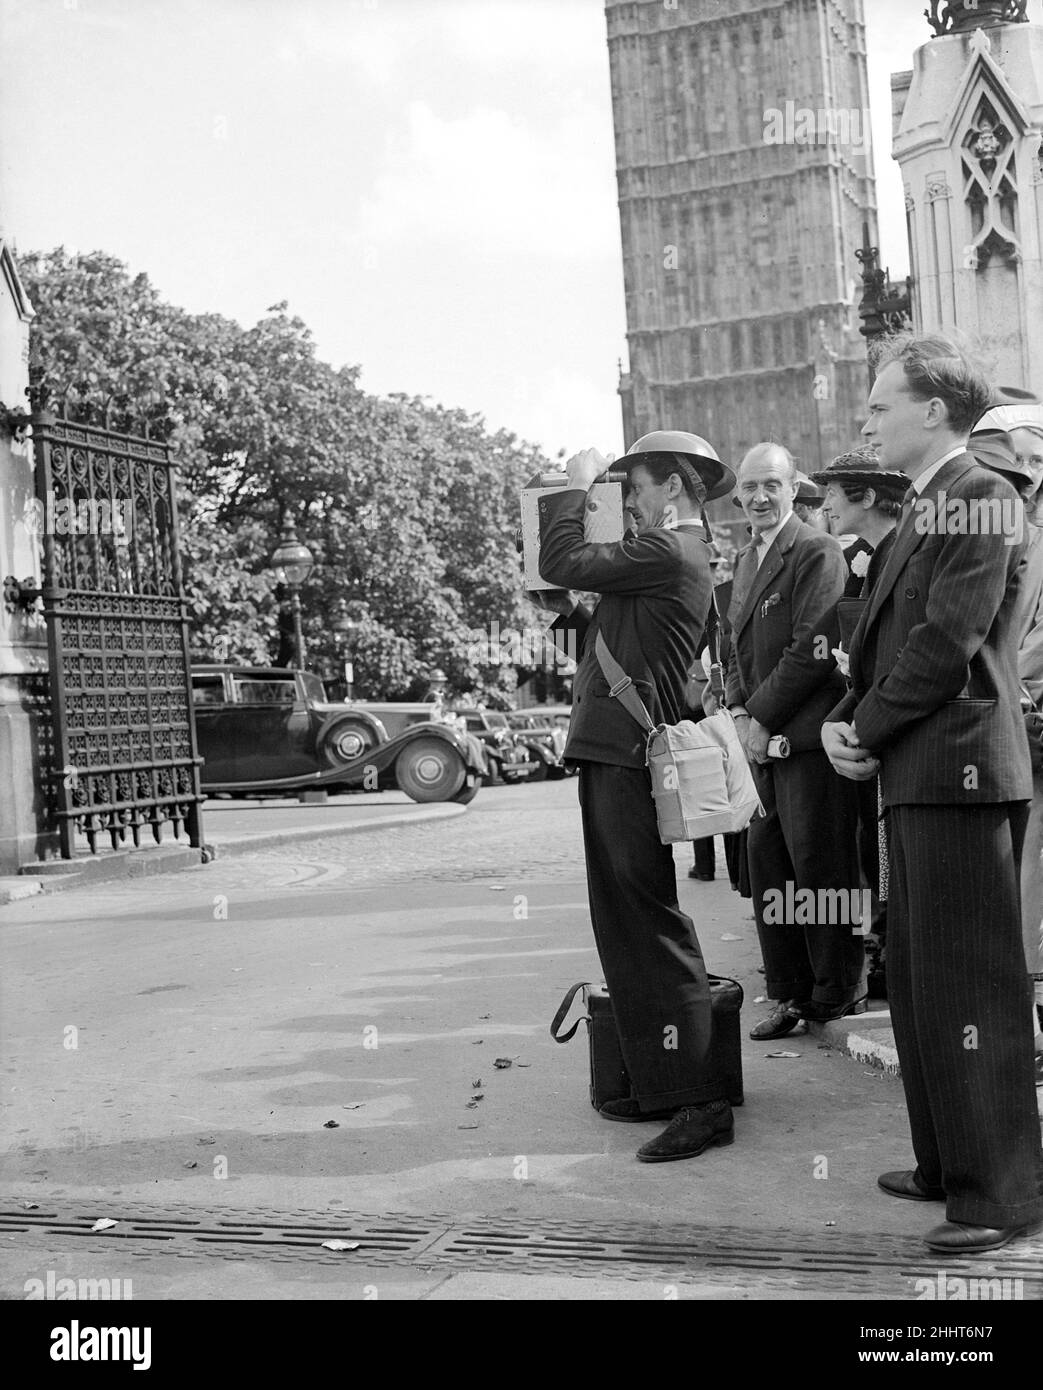 3rd September 1939, Large crowds gathered outside the Houses of Parliament as the zero hour 11am approached which was the time limit for the ultimatum to Germany to expire. Prime Minister Neville Chamberlain announced shortly after 11 that Great Britian had declared war on Germany following the Nazi refusal to retreat from Poland.Our Picture Shows: A news reel cameraman wearing a tin helmet filming the crowds reaction to the declaration of war Stock Photo